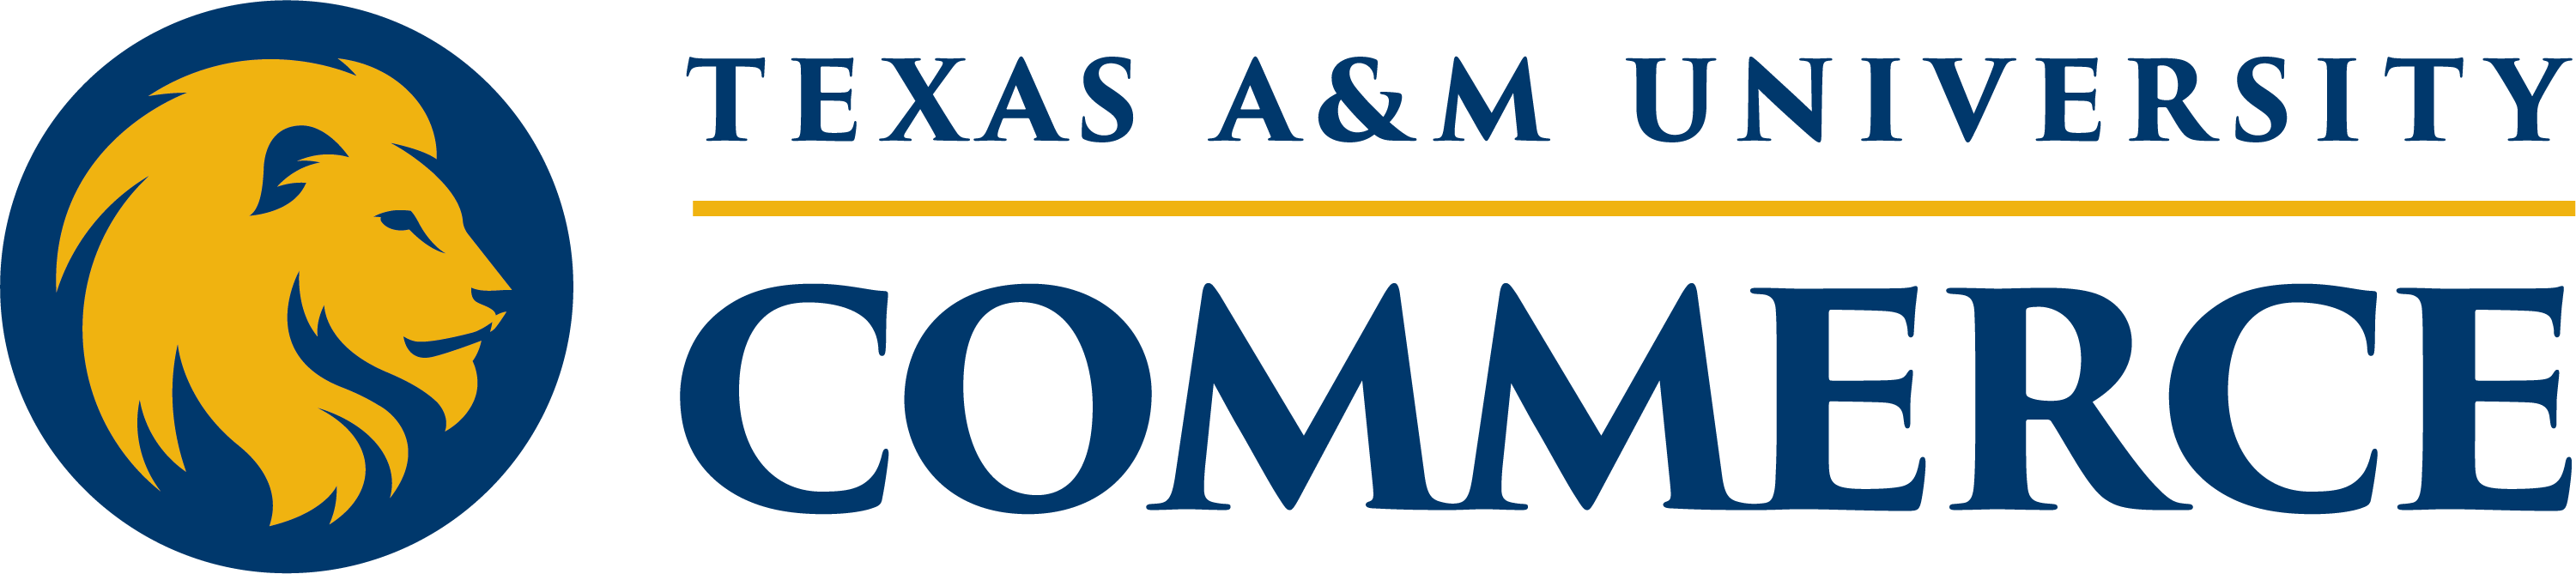 Image result for texas a and m university commerce